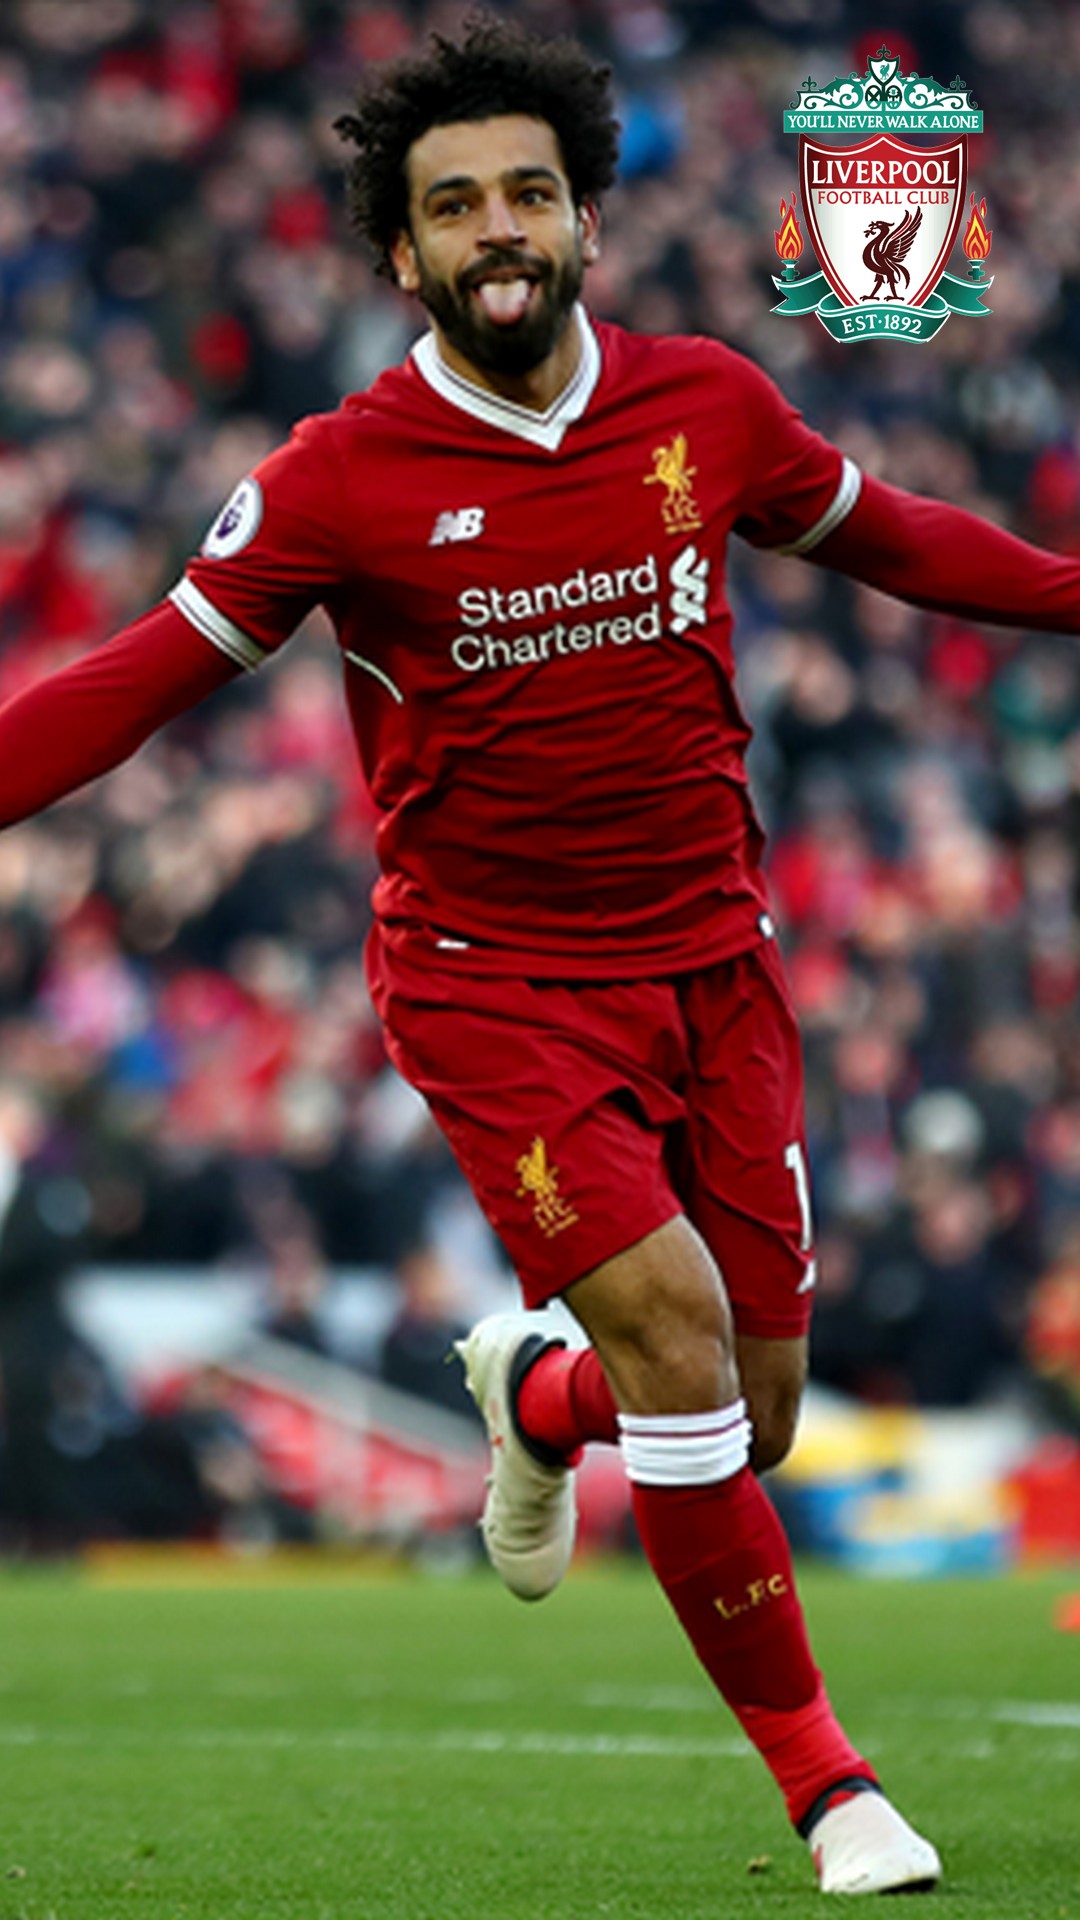 Salah Liverpool Wallpaper For Android with image resolution 1080x1920 pixel. You can make this wallpaper for your Android backgrounds, Tablet, Smartphones Screensavers and Mobile Phone Lock Screen